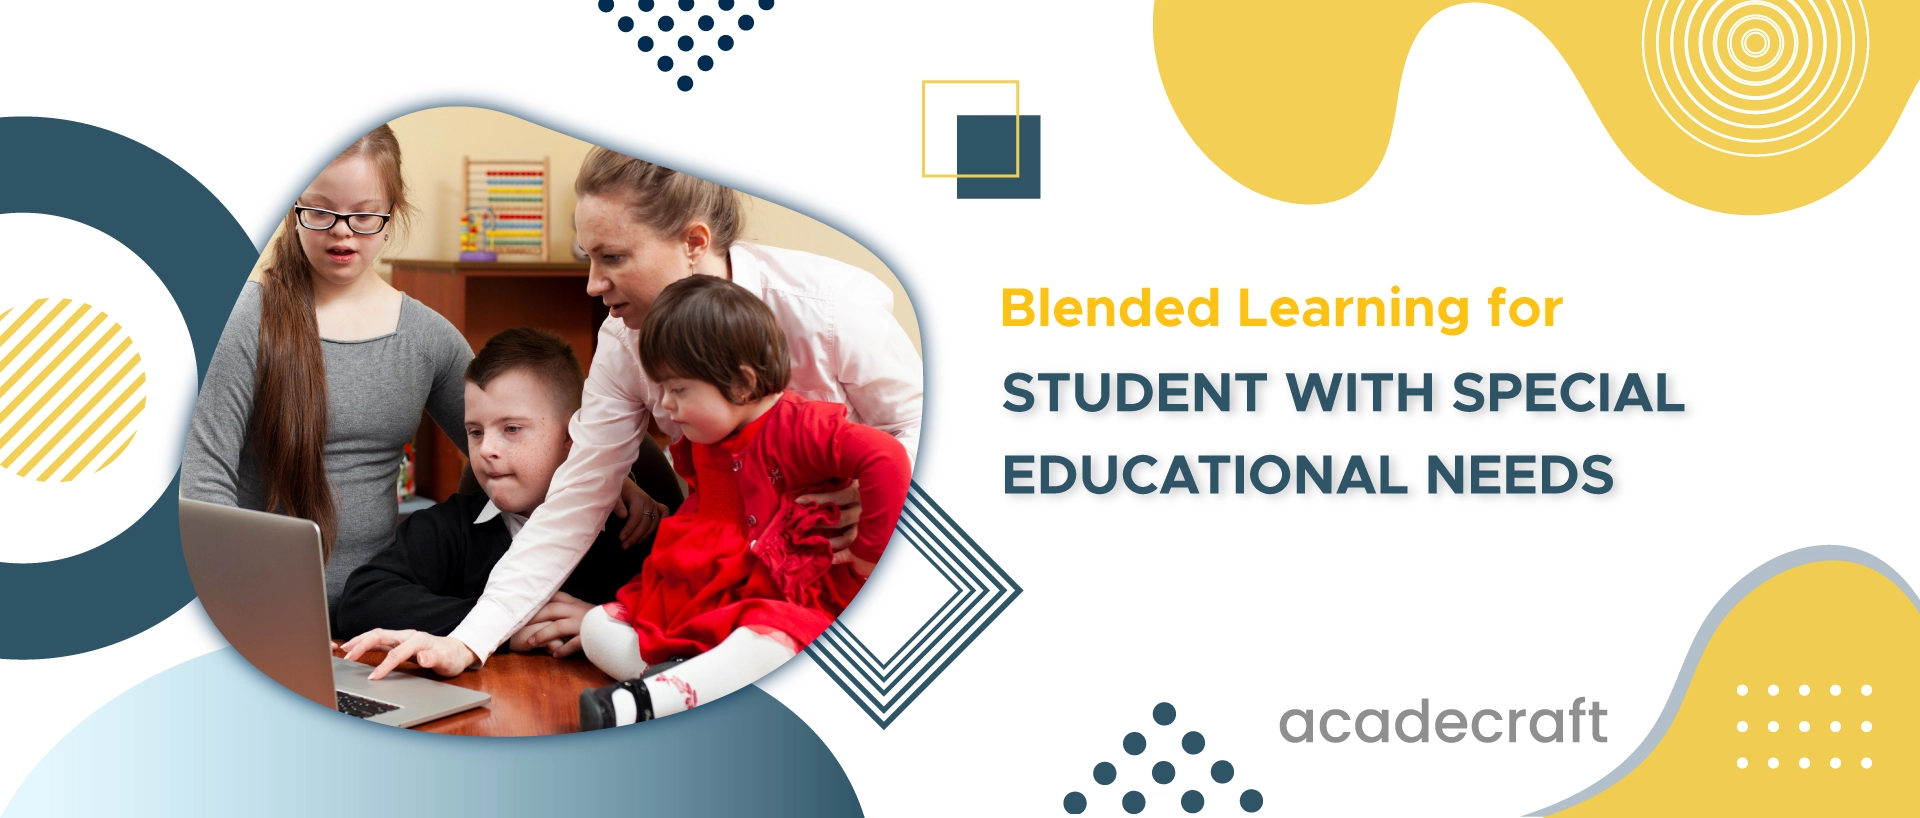 Blended Learning Approach for Special Educational Needs (SEN) Students